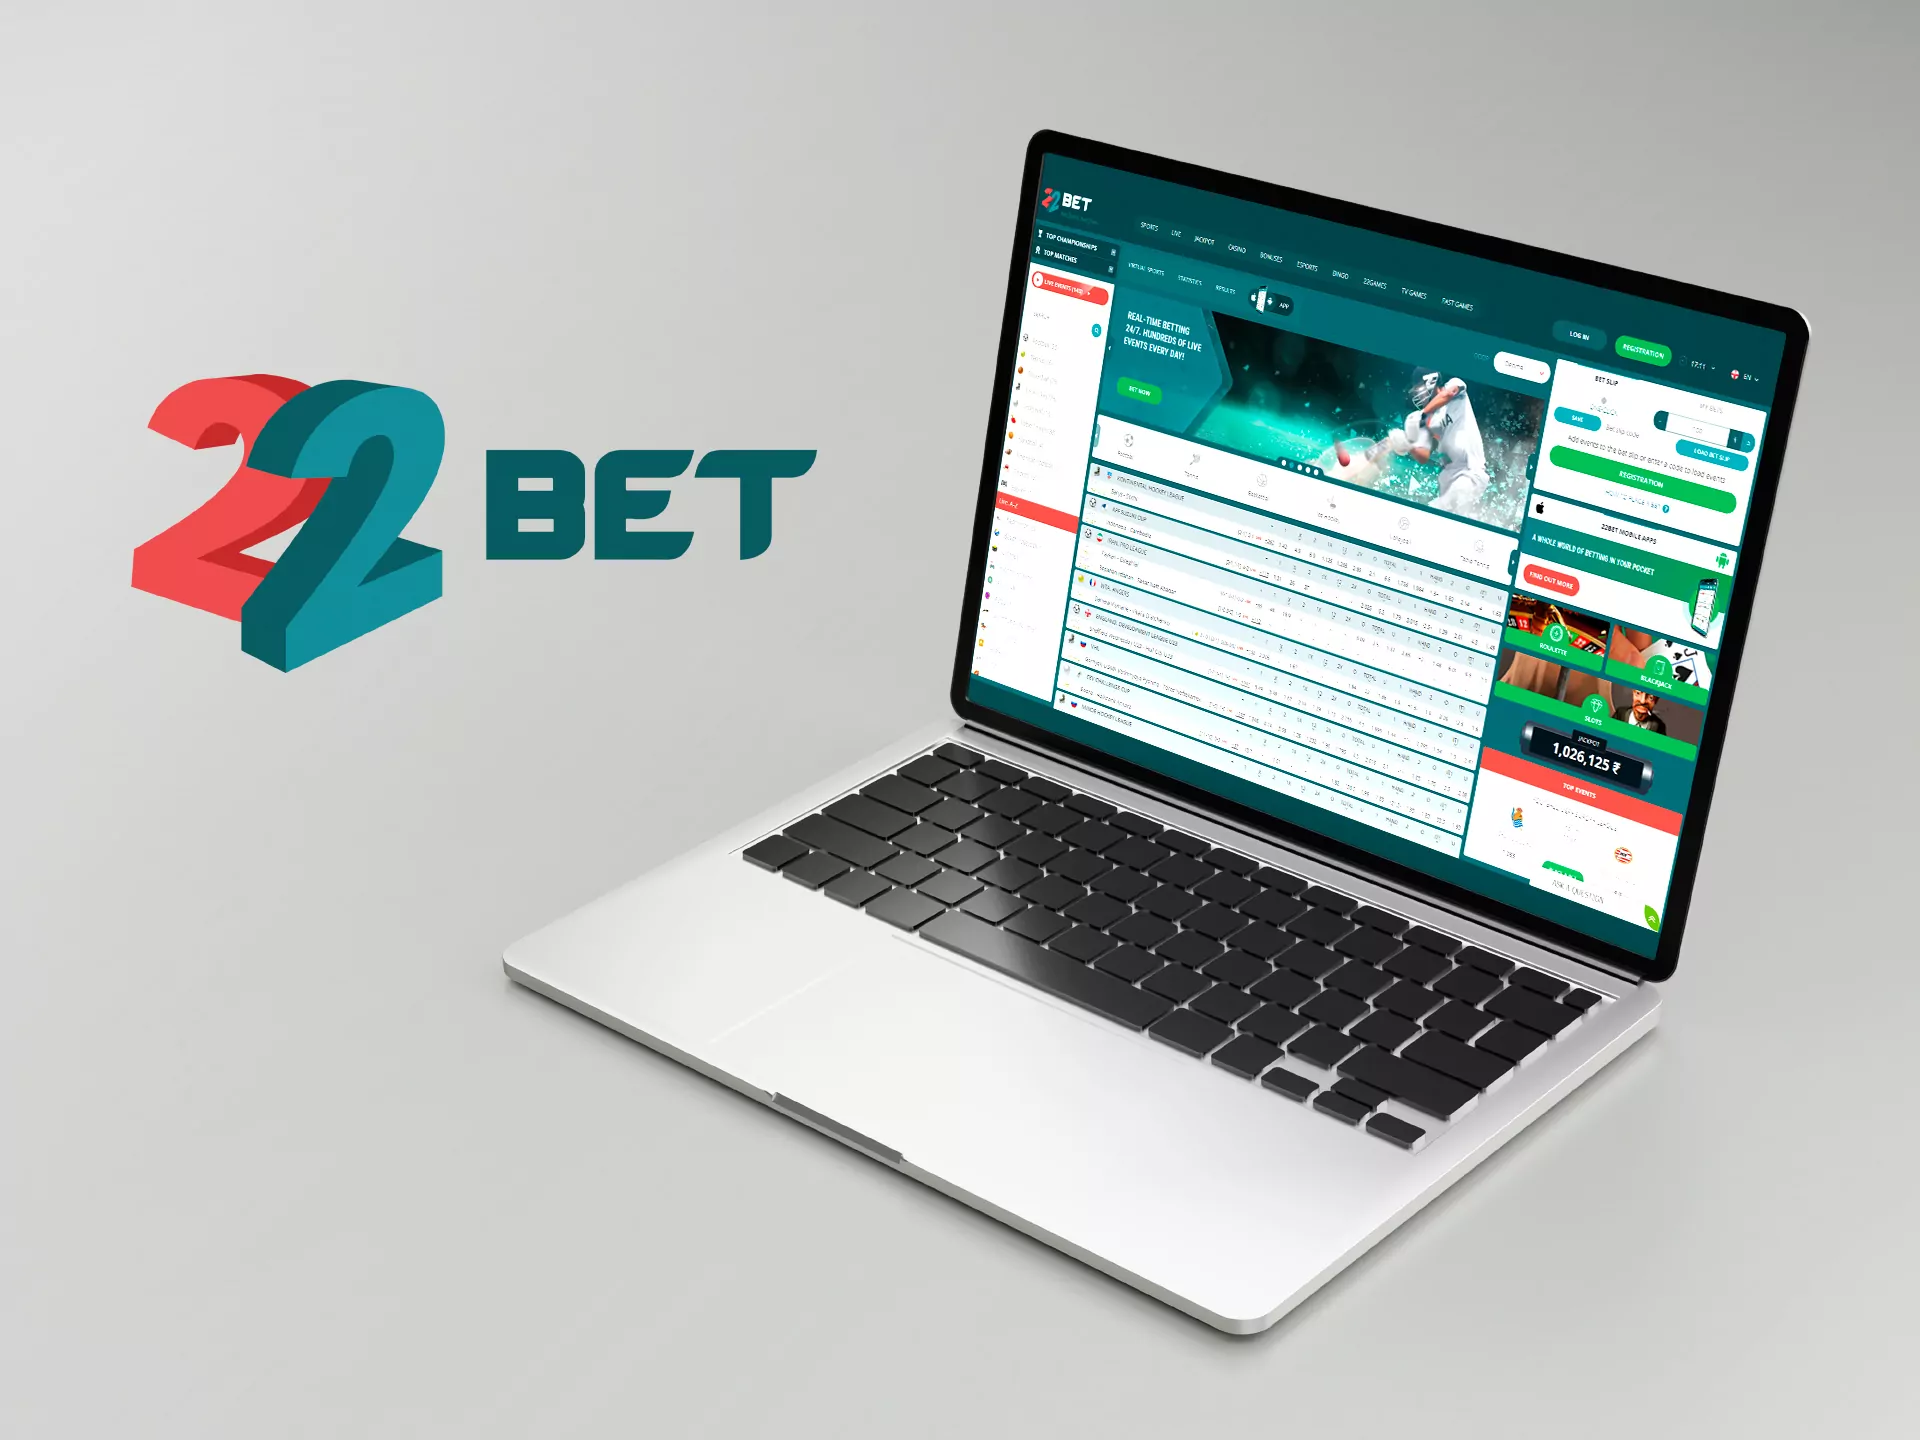 22bet is a young but trustworthy bookmaker focusing on the Asian betting market.